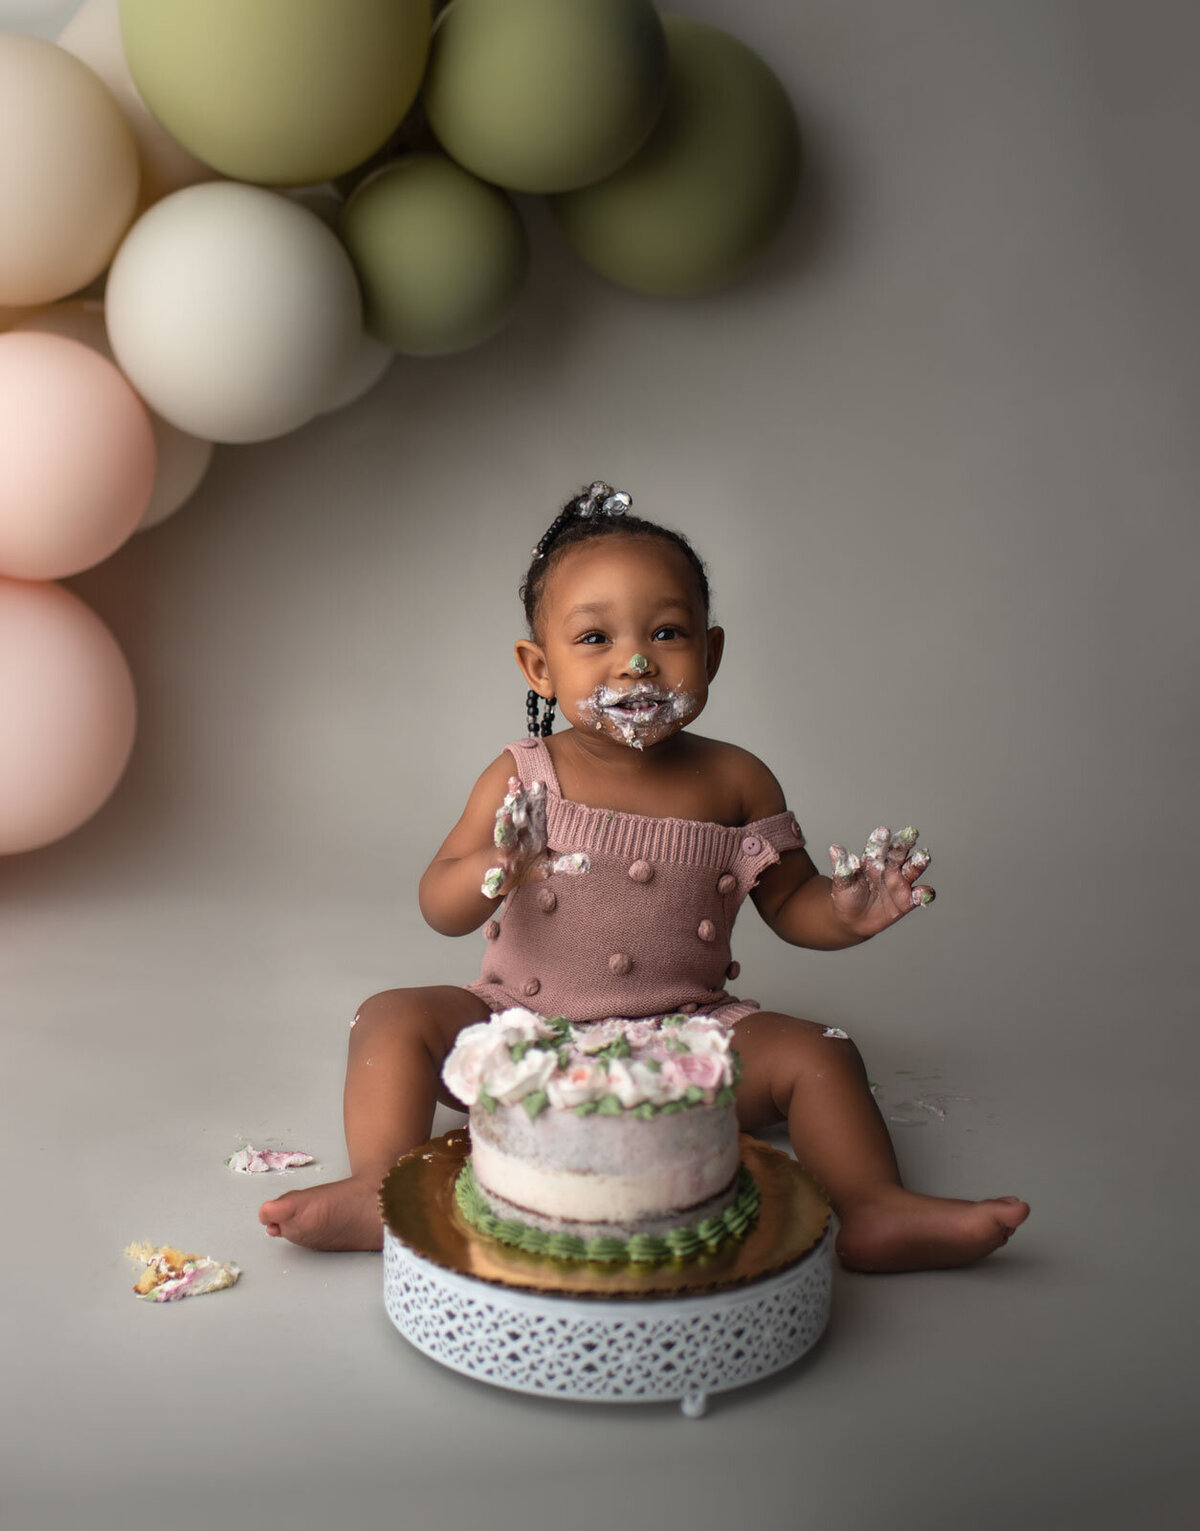 happy baby eating cake with balloons behind her at st. louis cake smash session